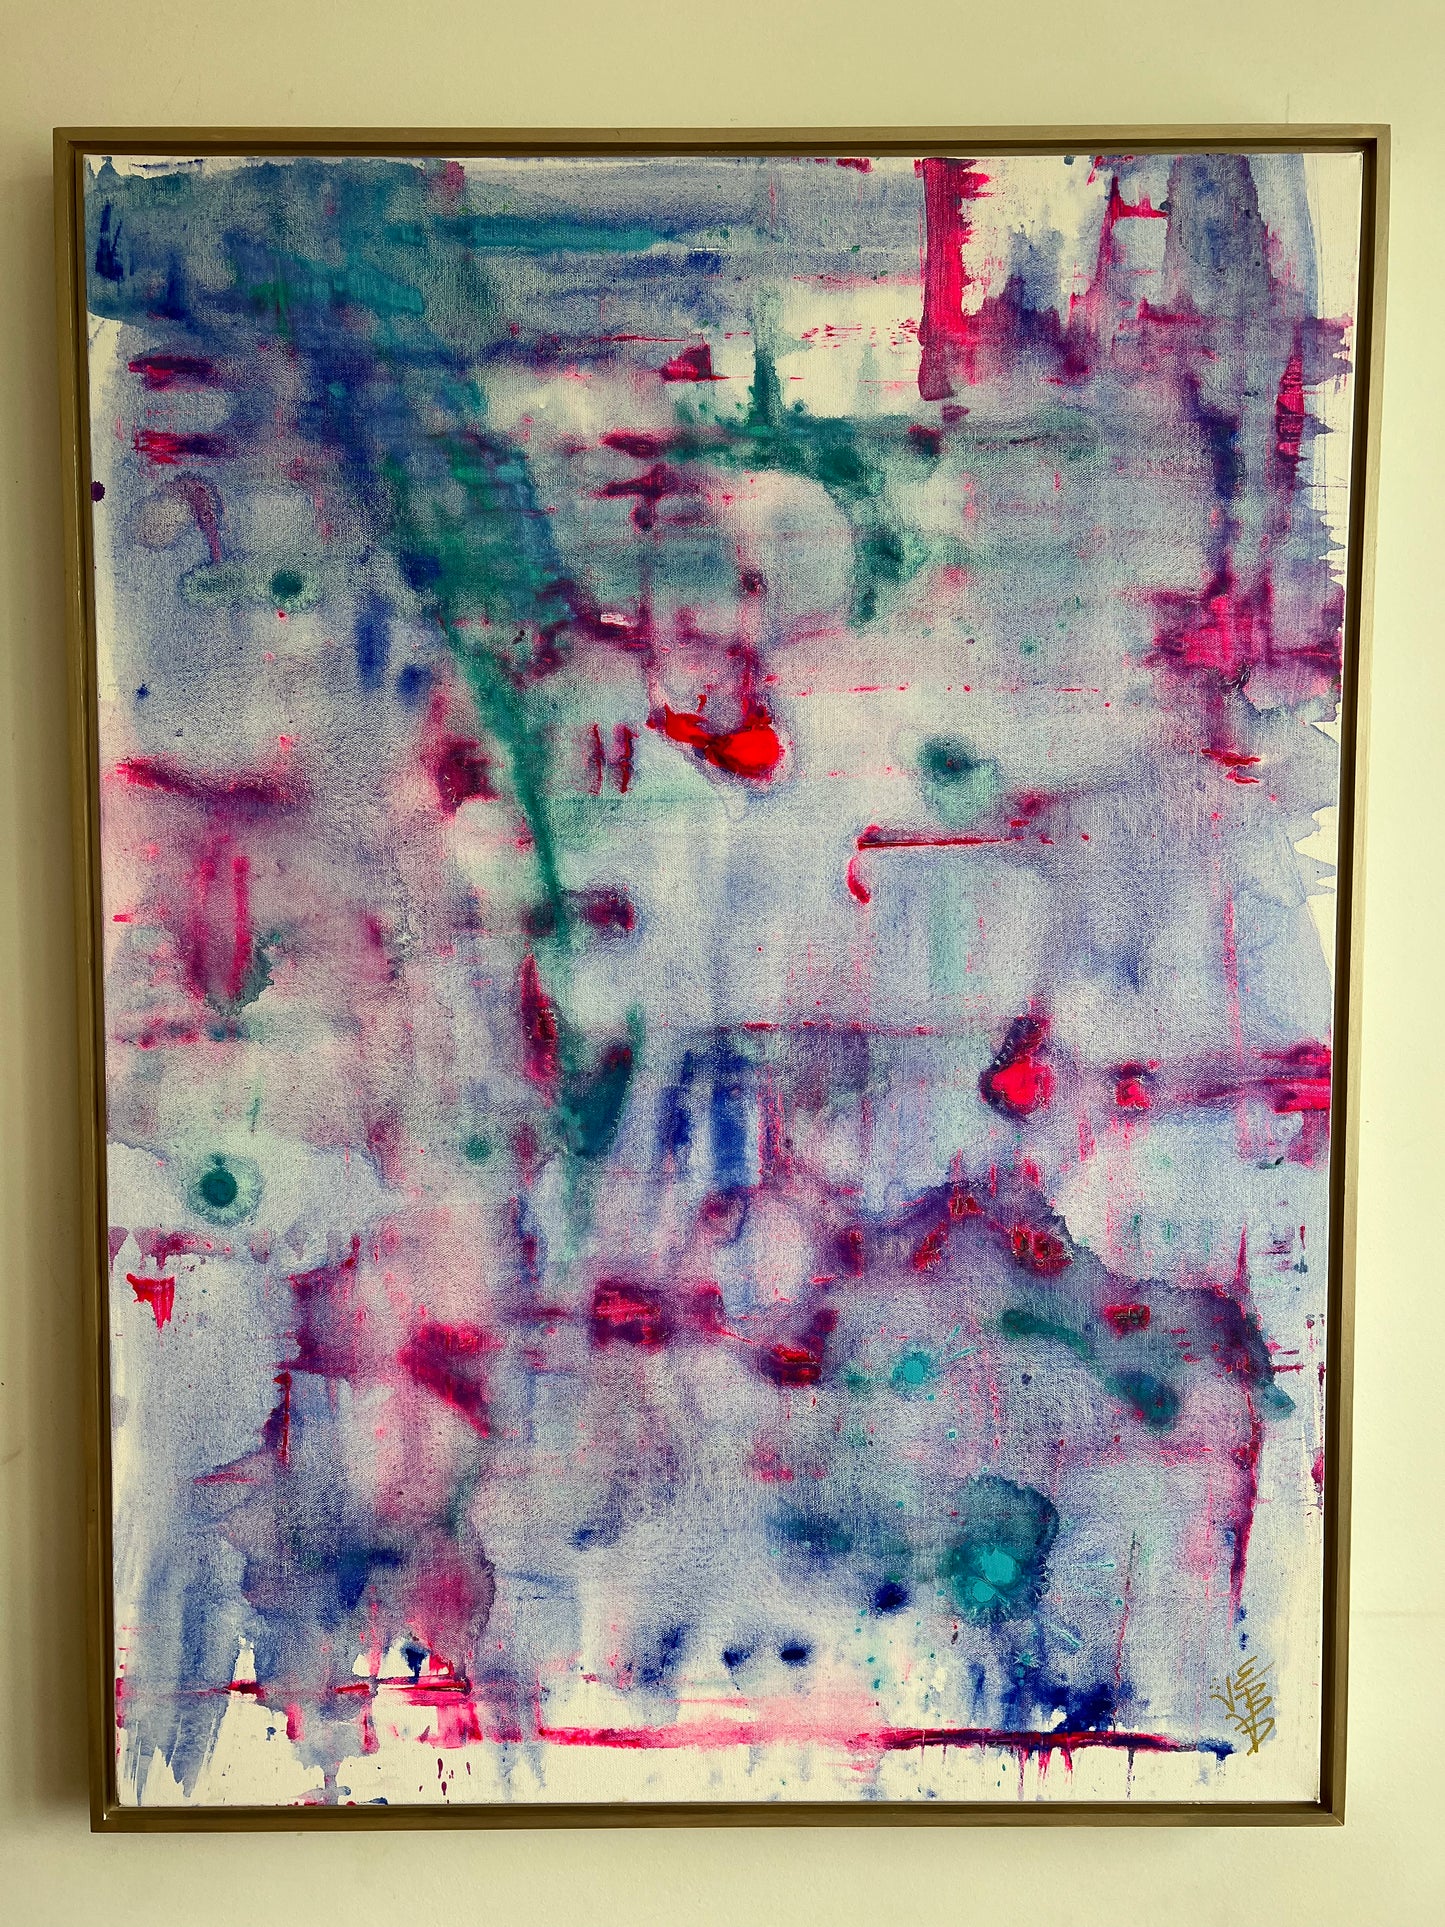 31x41 Saturated abstract blues, pinks 30x40